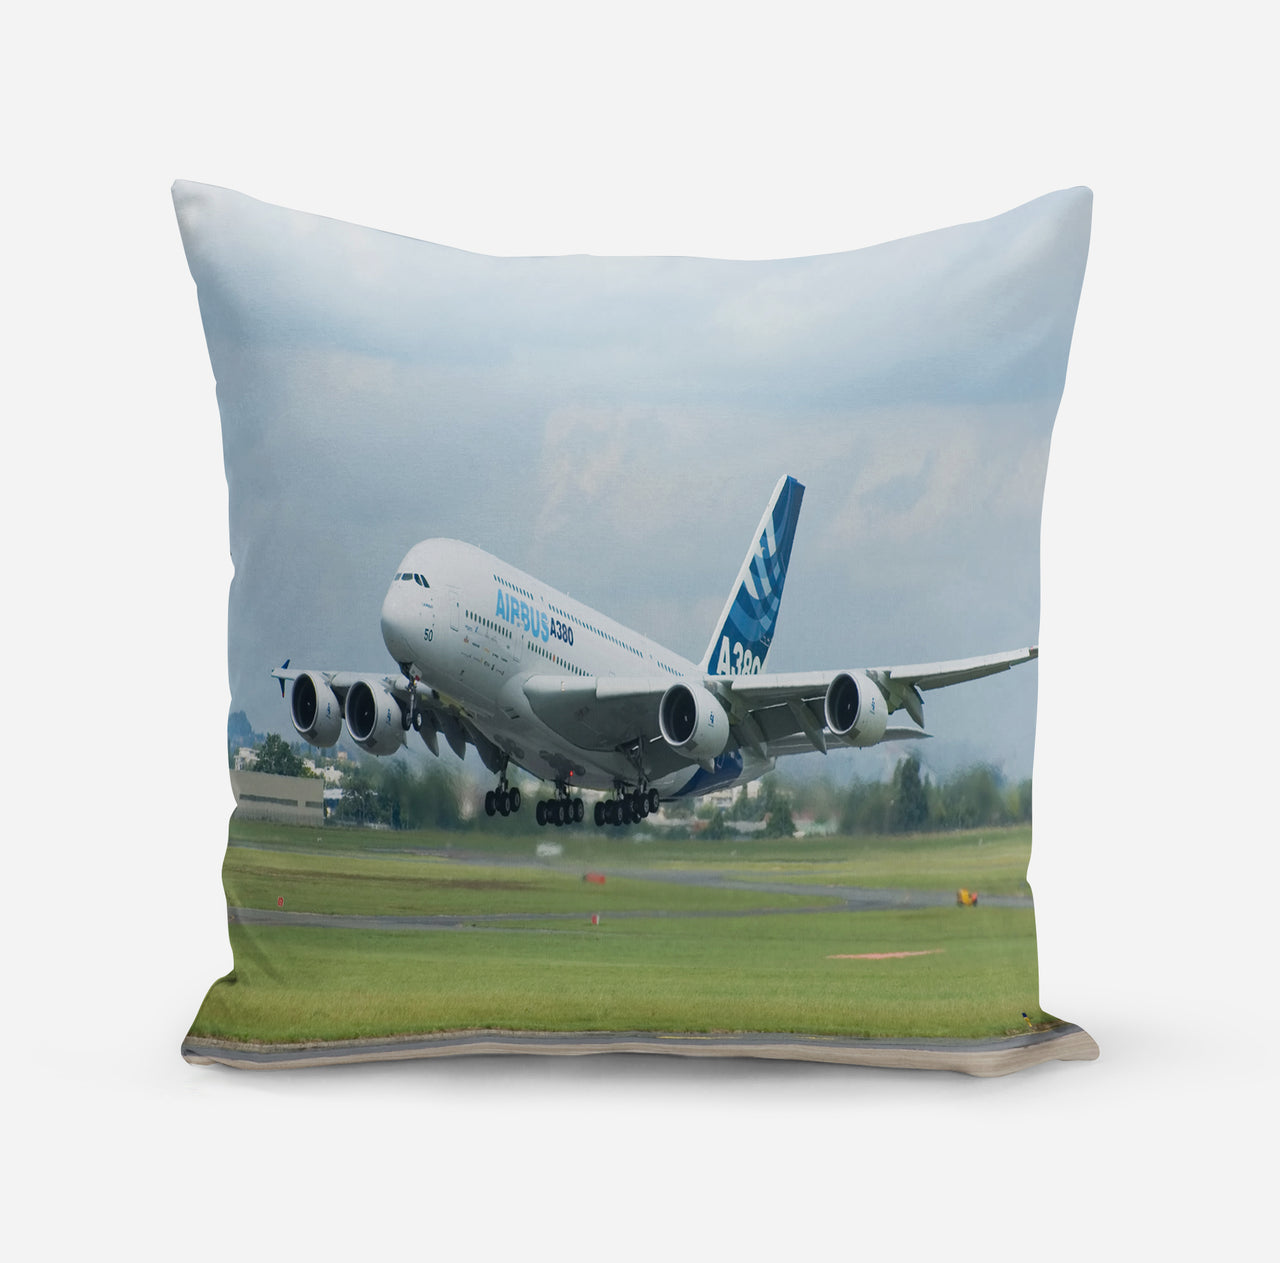 Departing Airbus A380 with Original Livery Designed Pillows